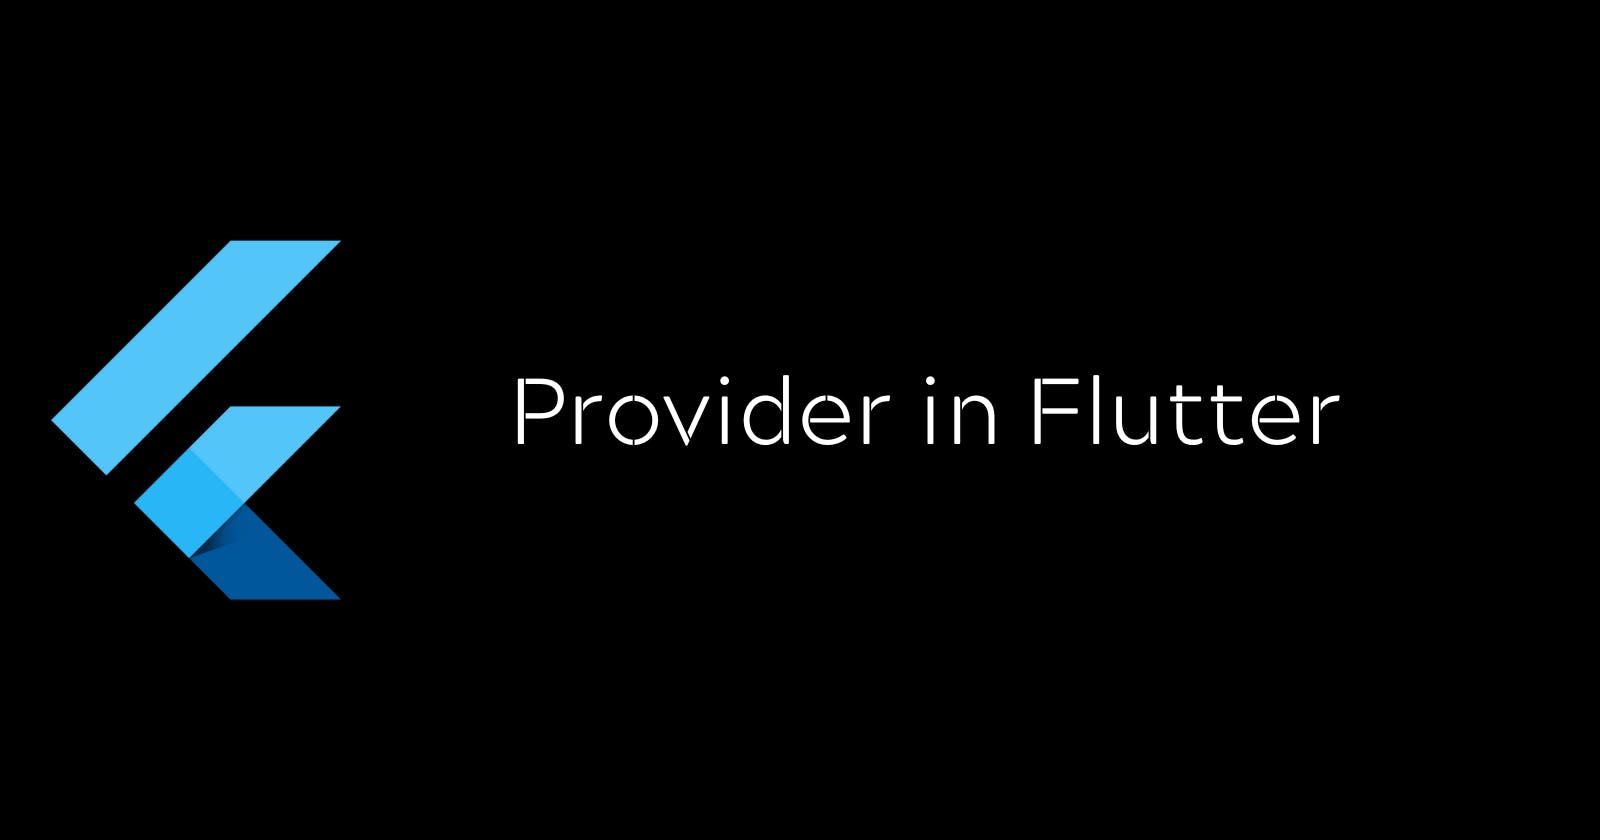 Getting started with Provider in Flutter